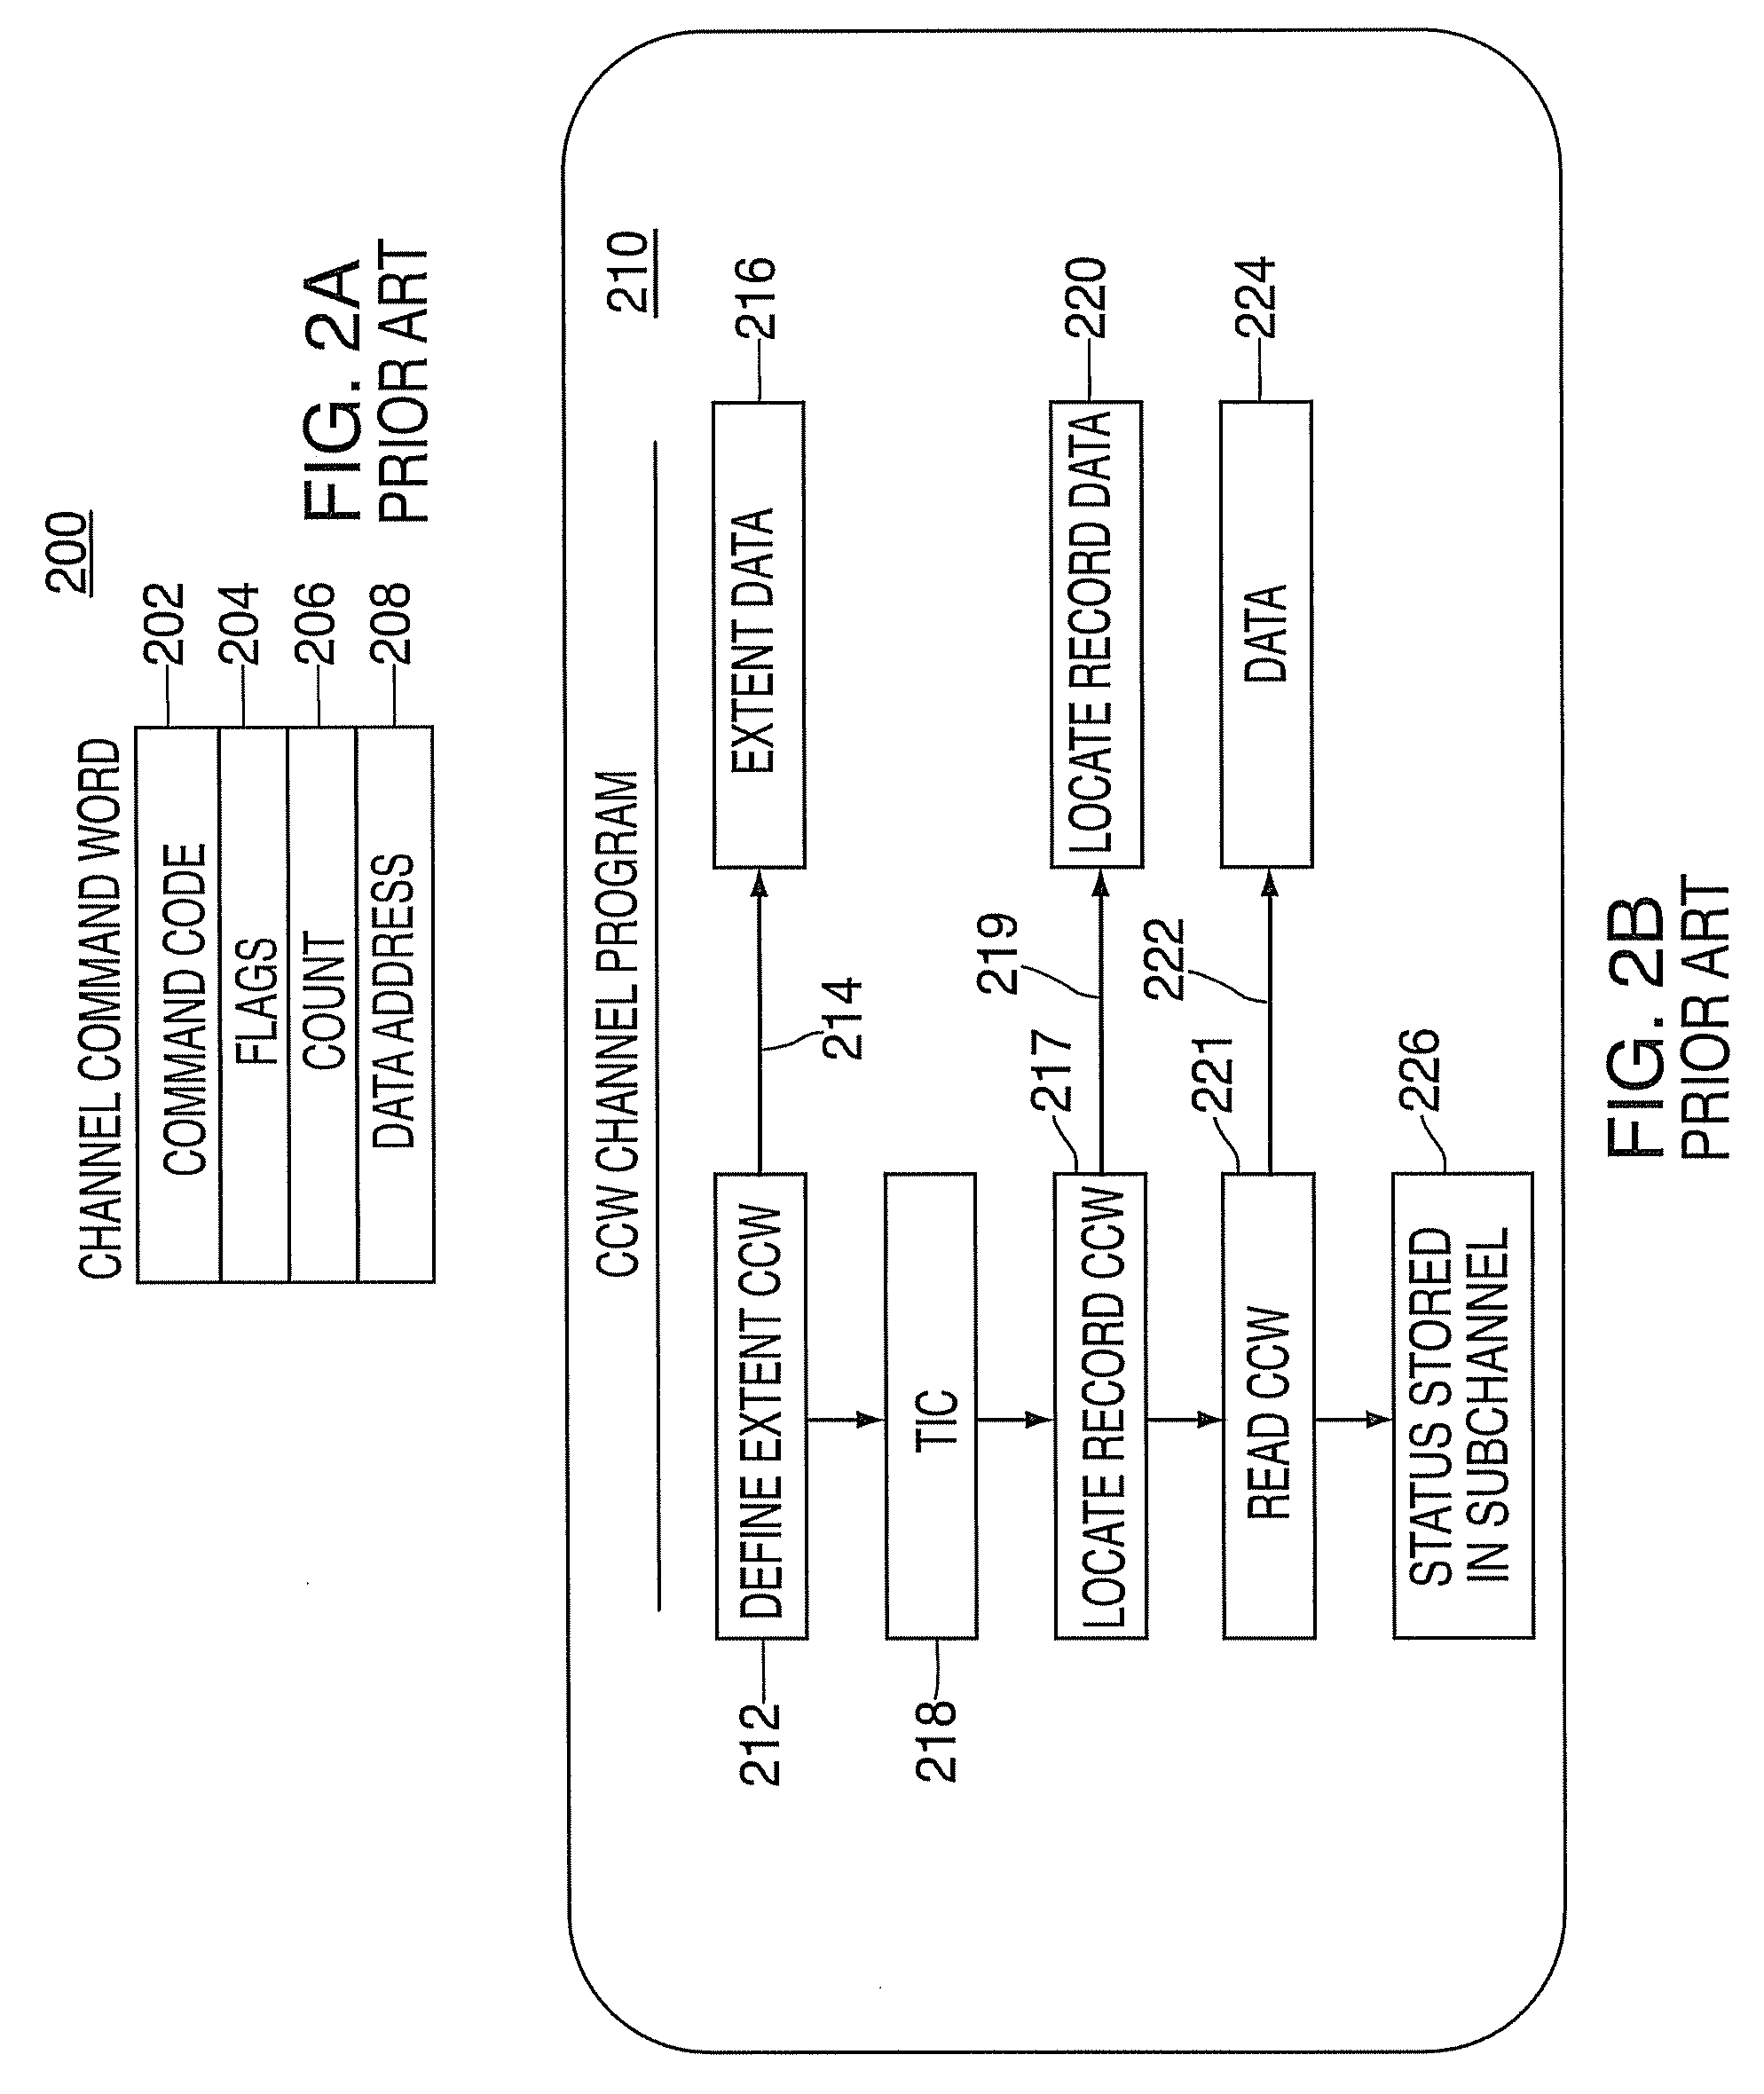 Reserved device access contention reduction